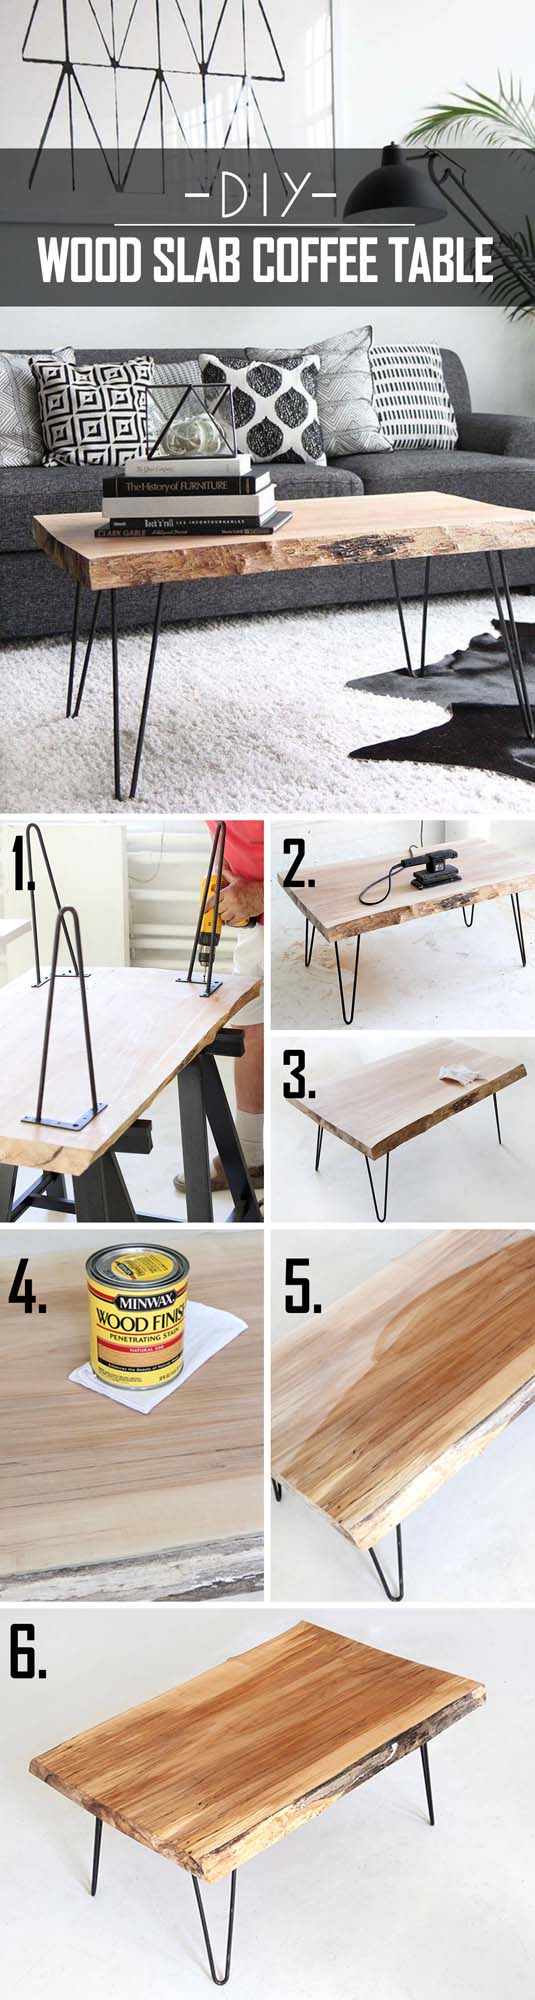 35 Best Weekend DIY Home Decor Projects and Ideas for 2021 ...